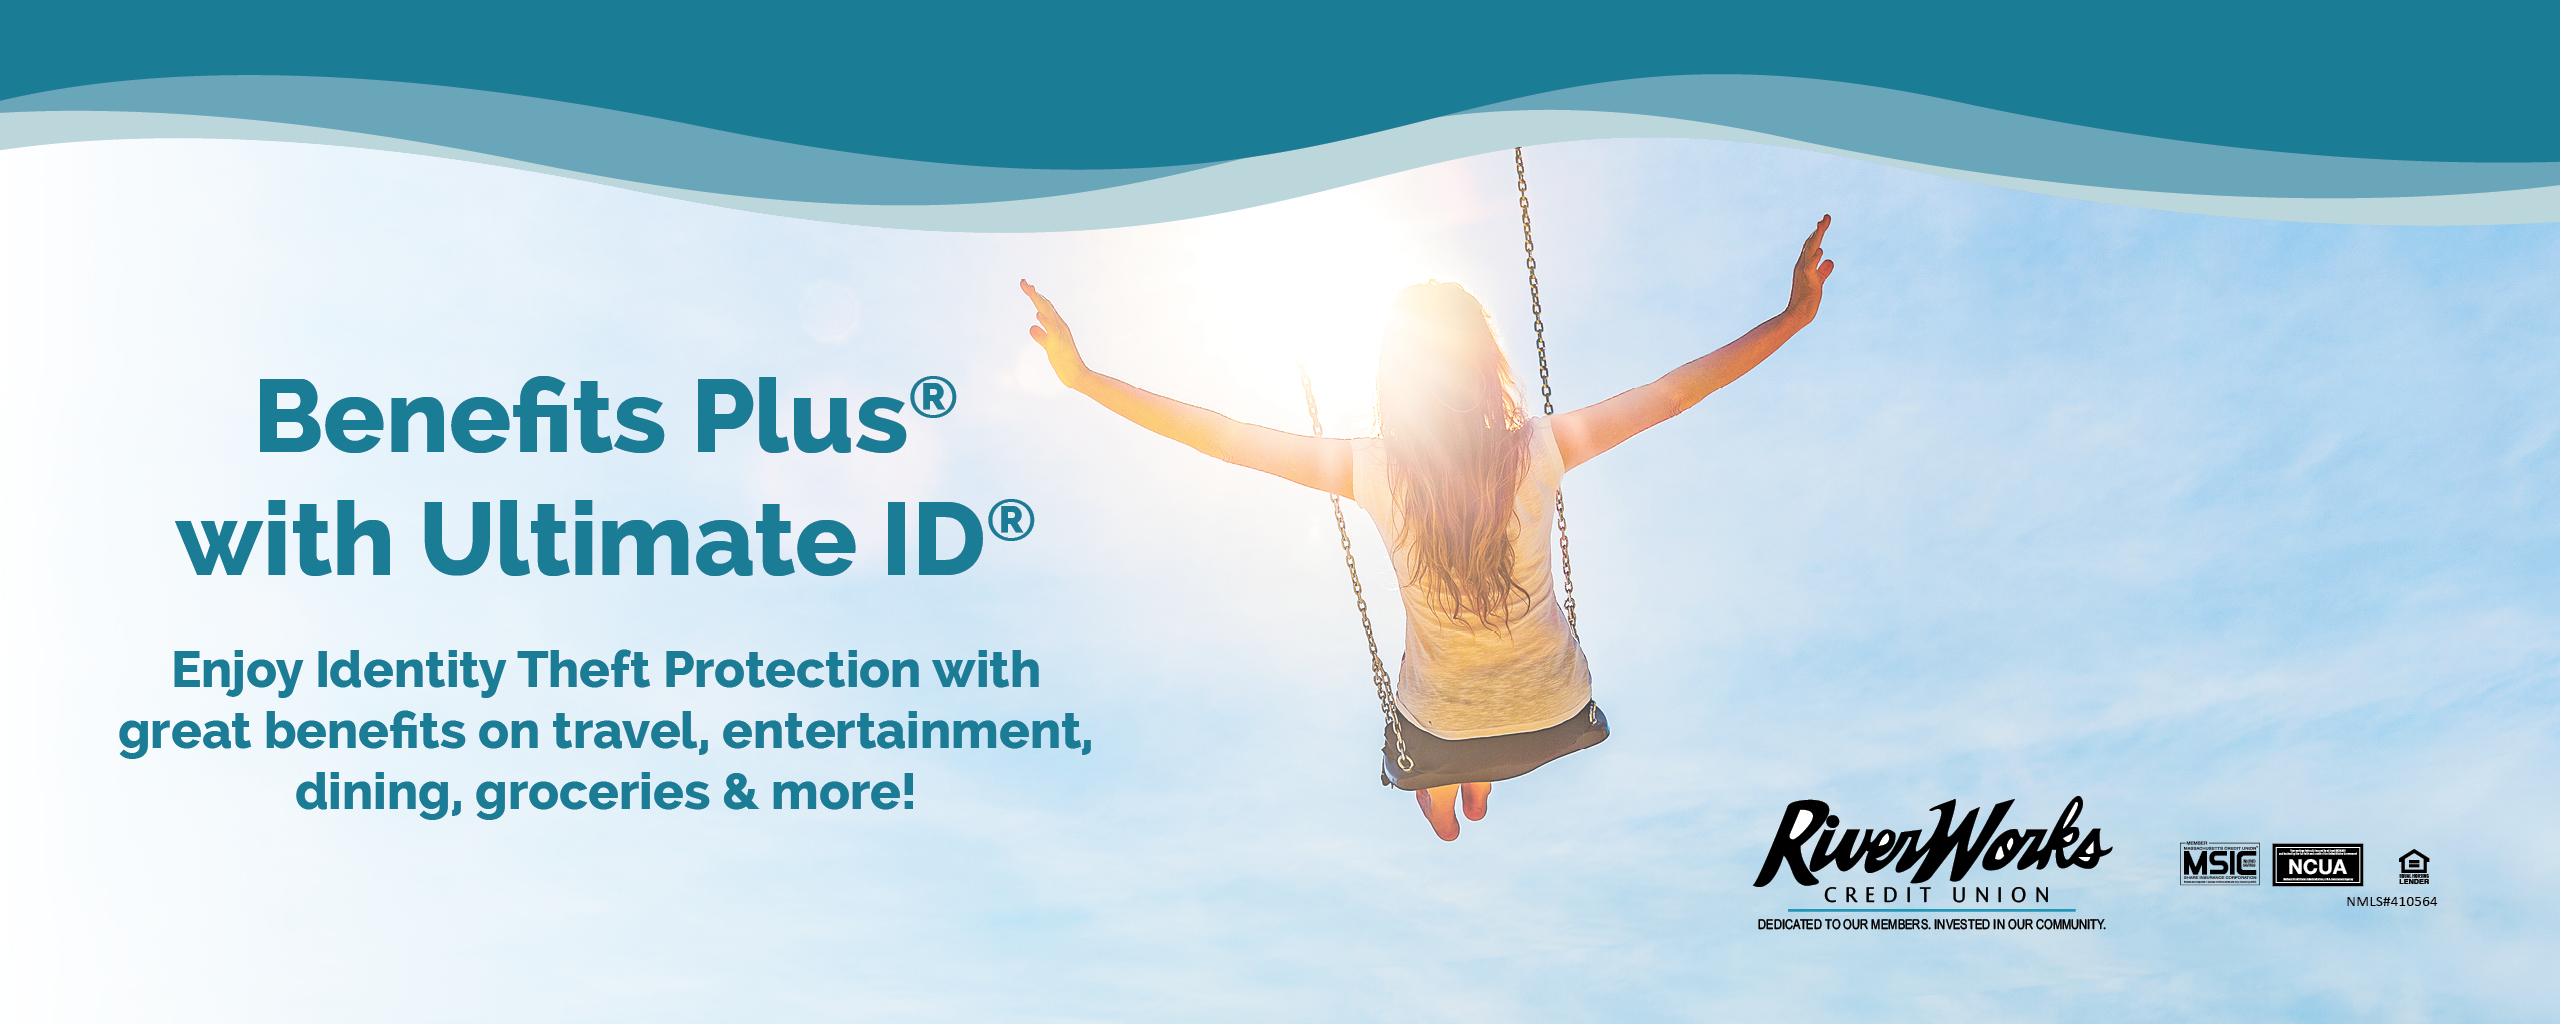 Benefits Plus with Ultimate ID